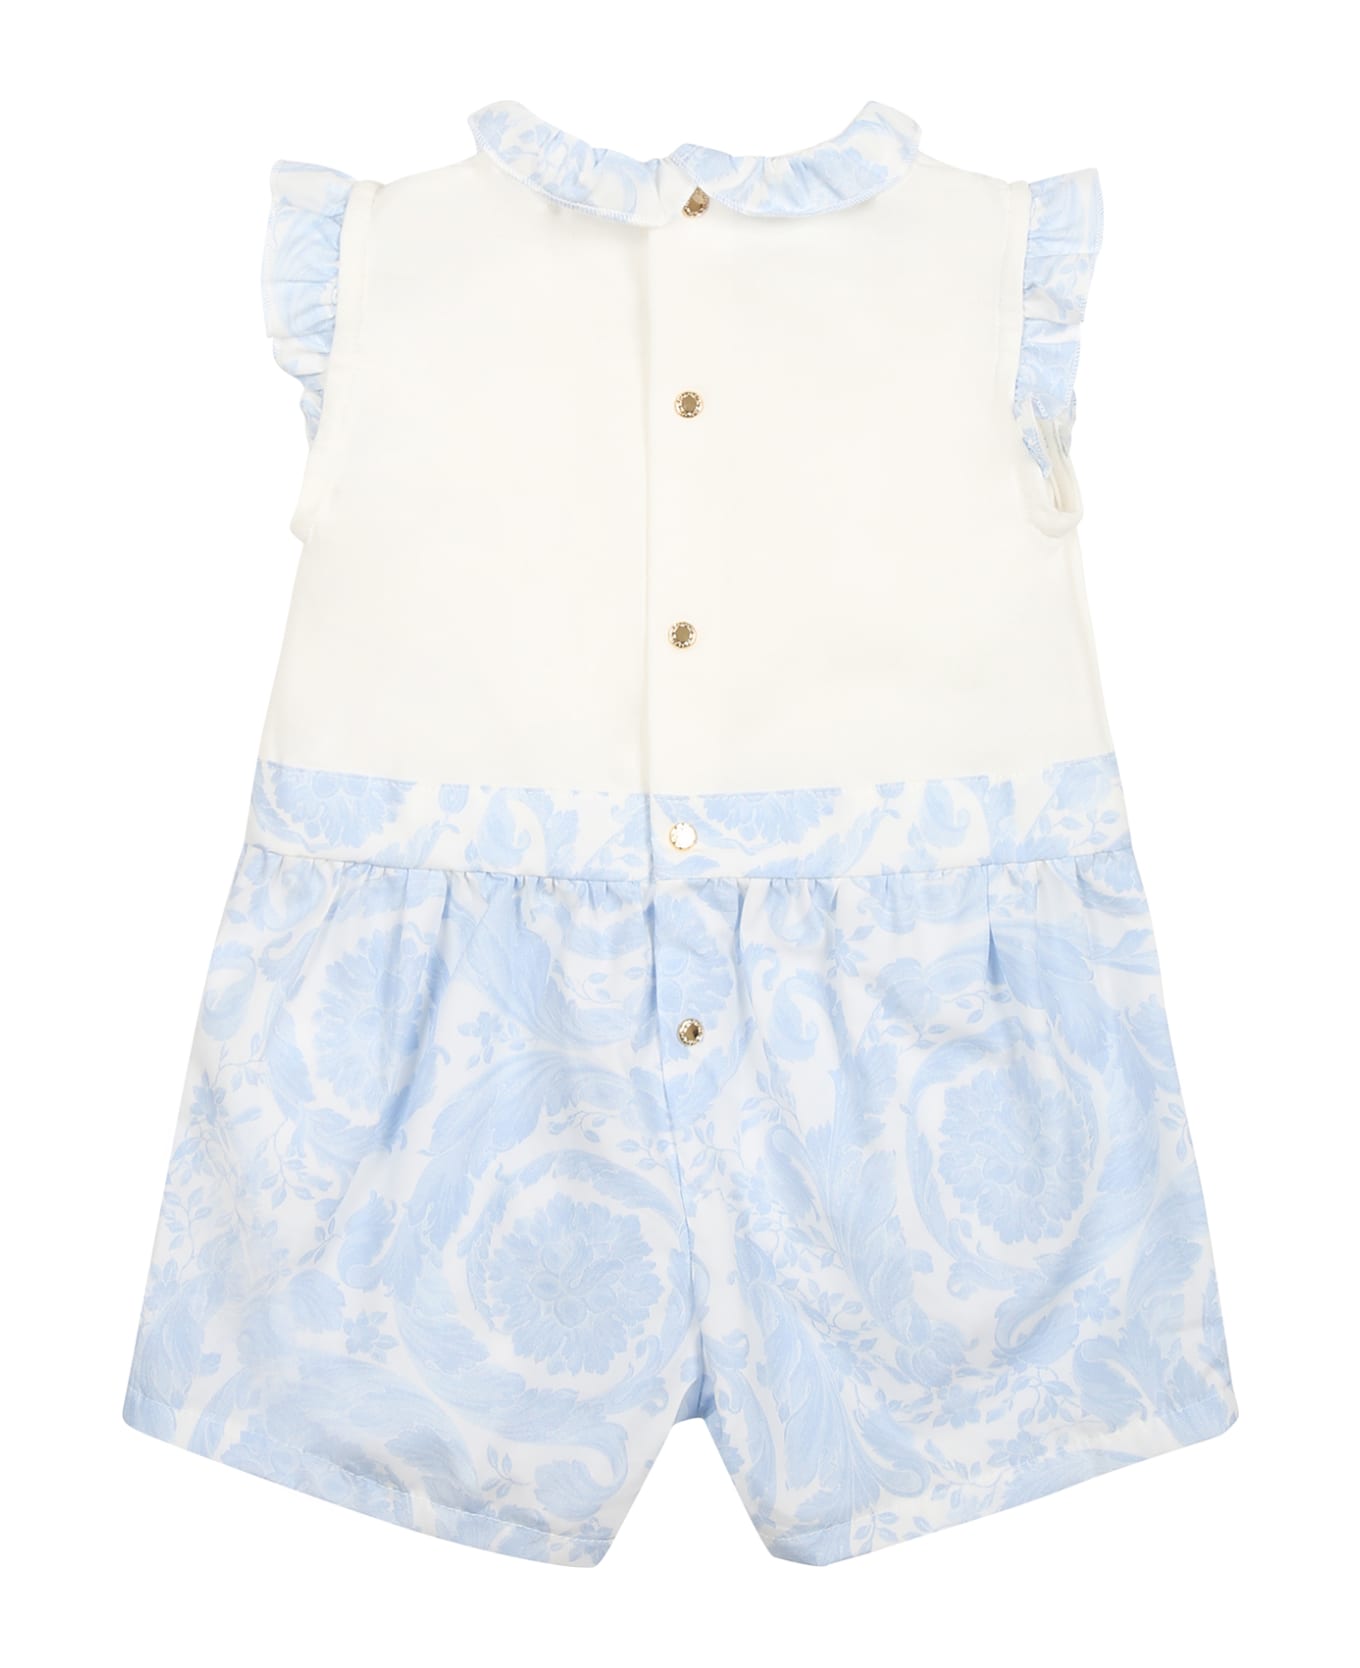 Versace Light Blue Romper For Babies With Baroque Print - Light Blue